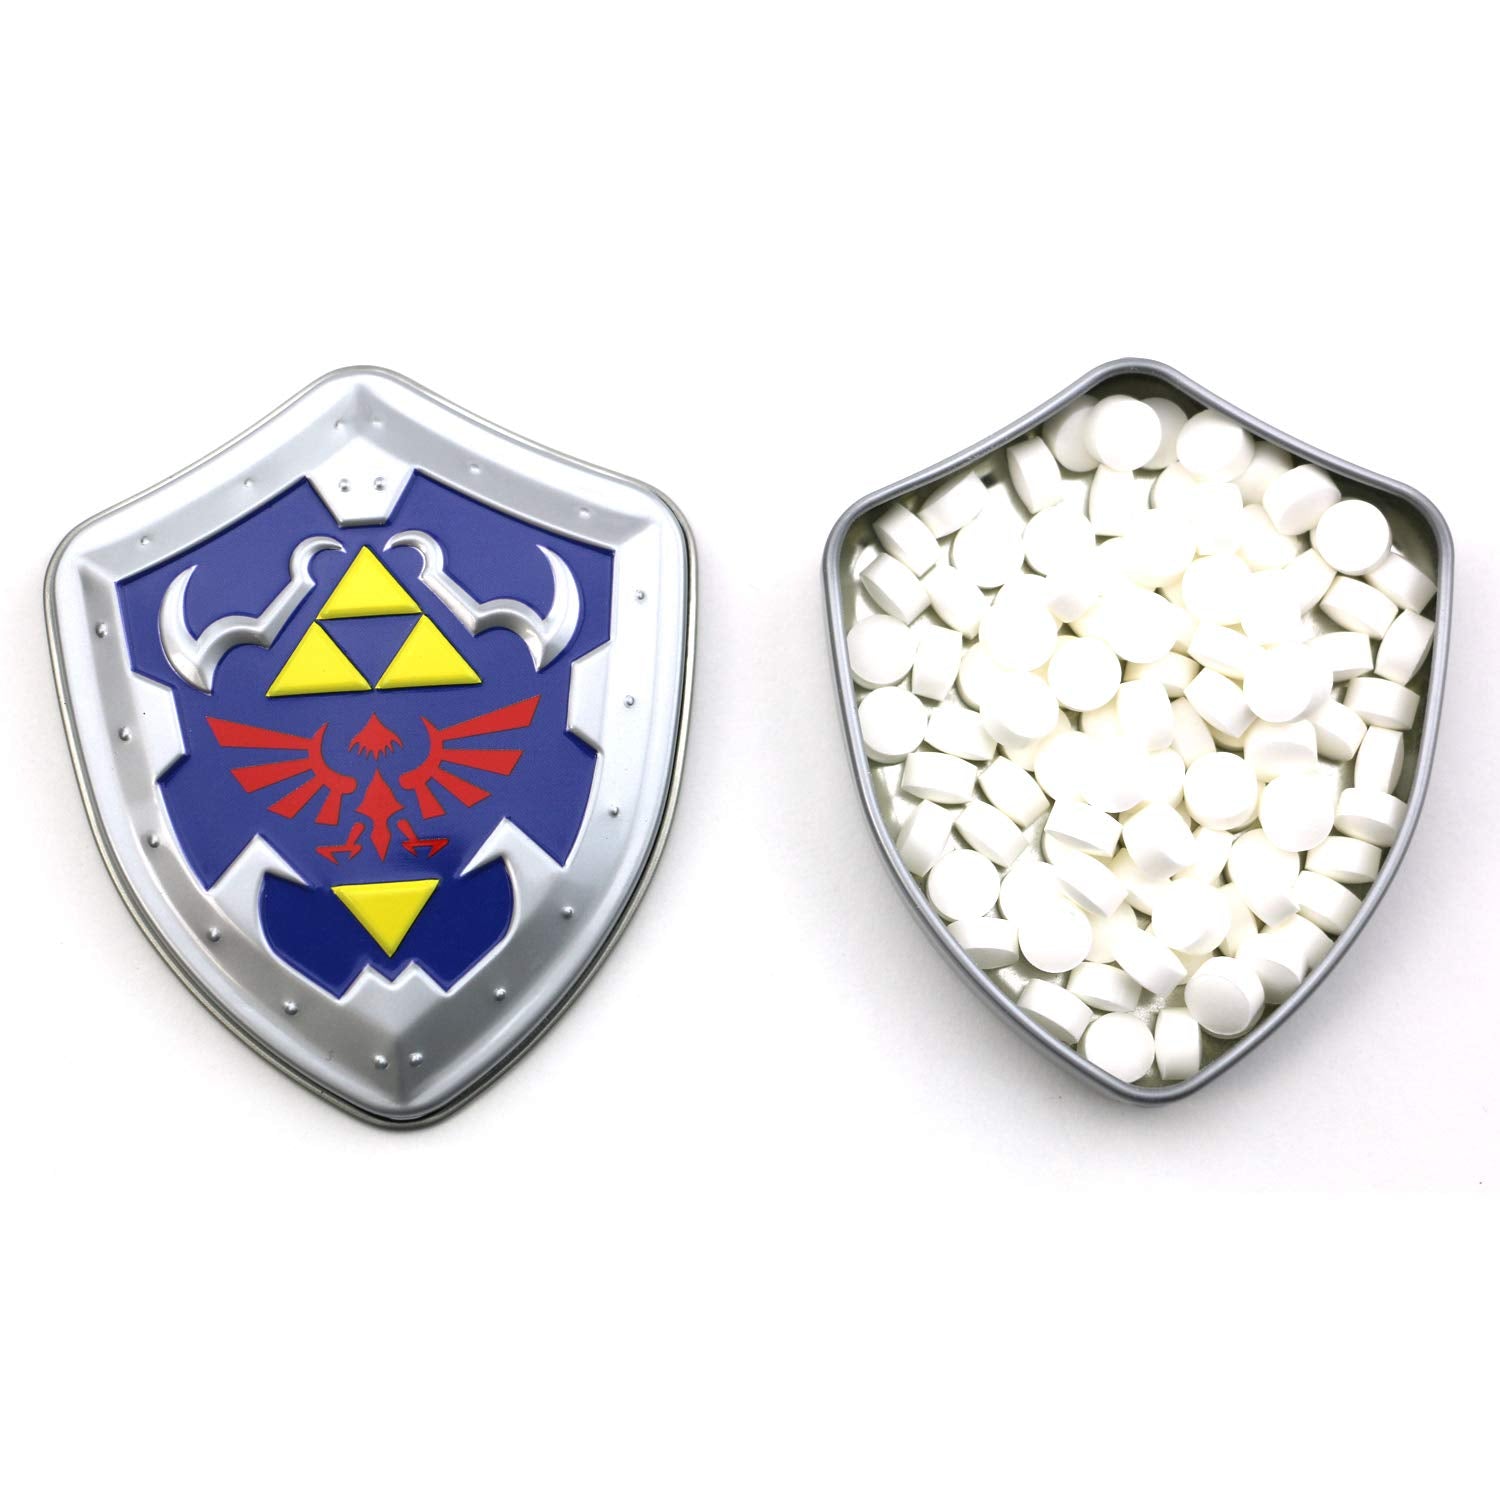 Nintendo Legend of Zelda Link Shield Tin Mints (2 Pack) Peppermint Flavor Gift Stuffer with 2 GosuToys Stickers